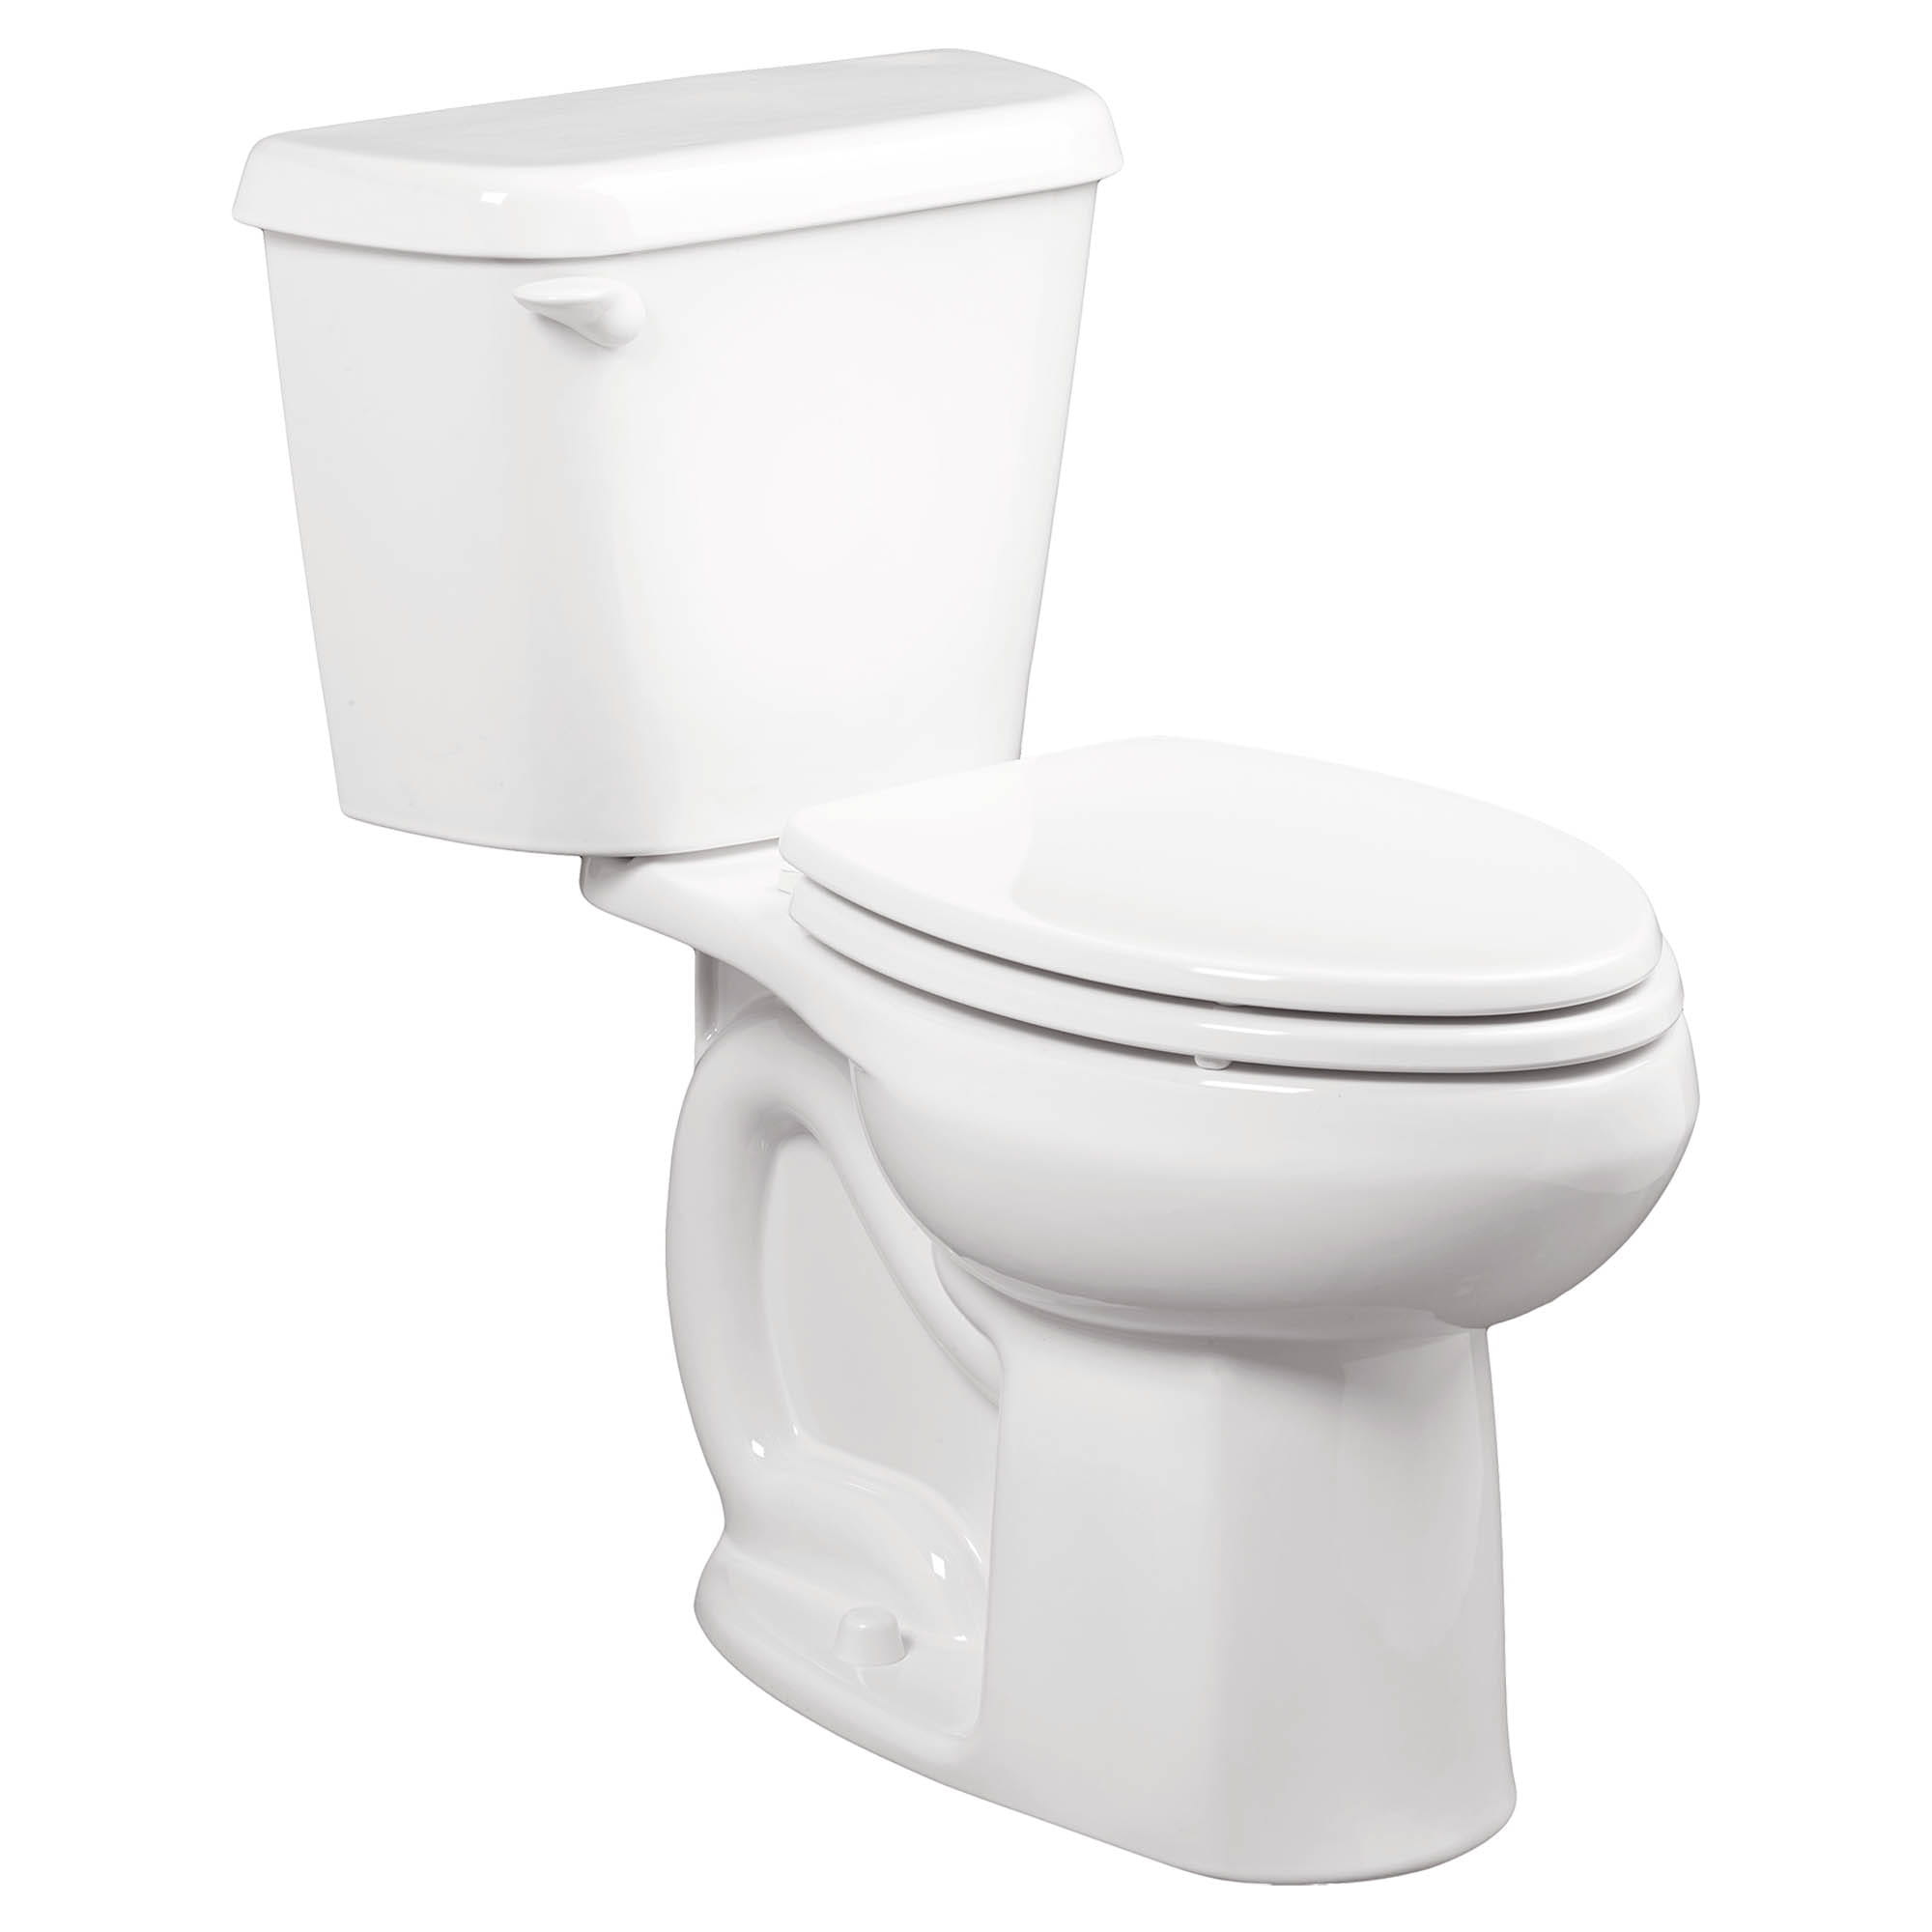 Colony® Two-Piece 1.6 gpf/6.0 Lpf Chair Height Elongated 10-Inch Rough Toilet Less Seat